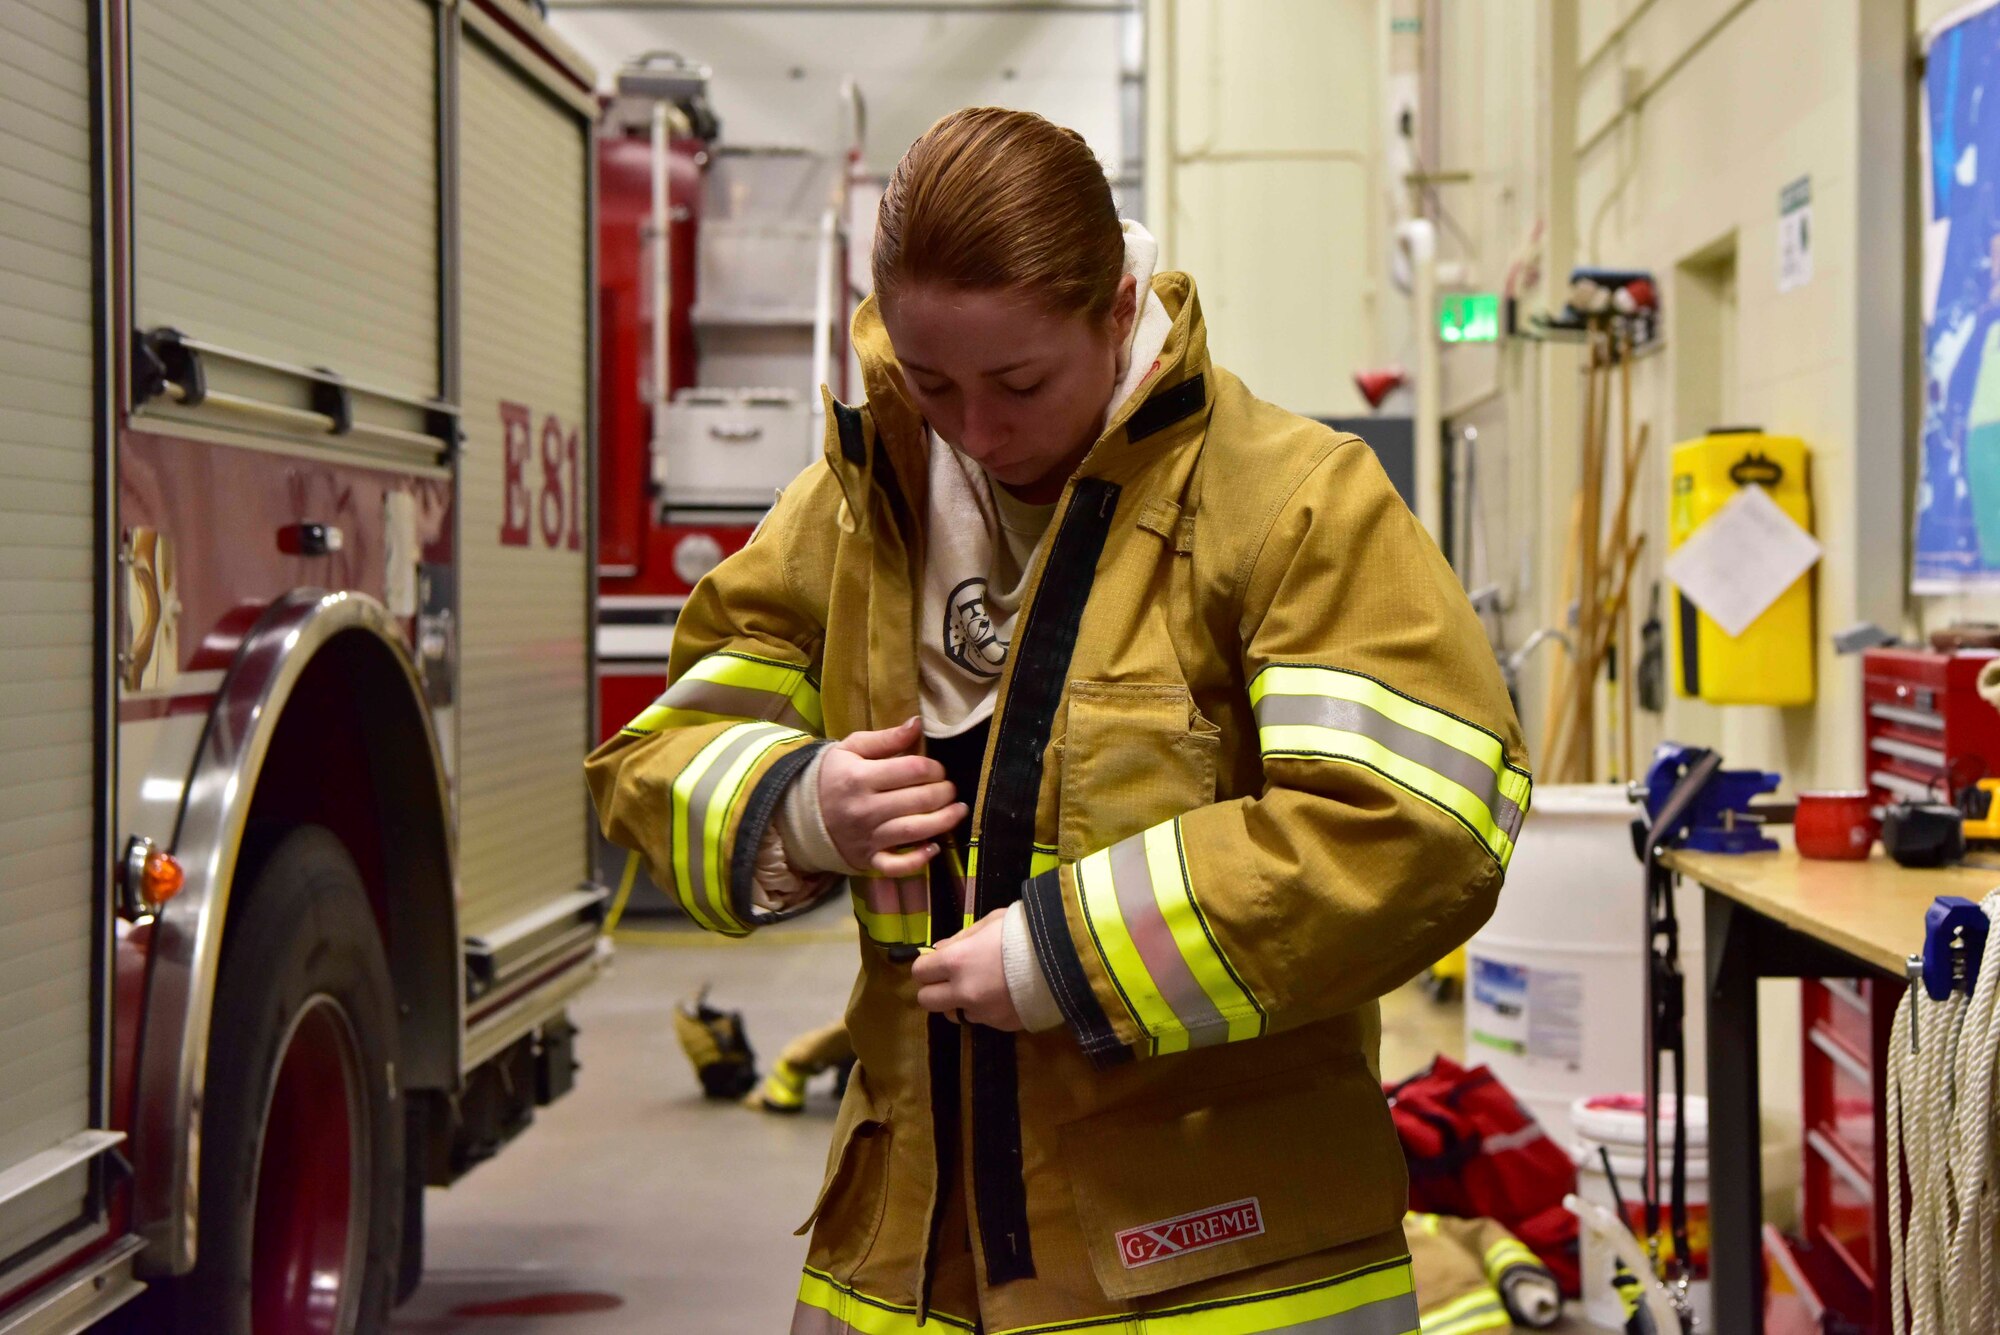 Airman Lily Lane, a 354th Civil Engineer Squadron firefighter, dons fire protection equipment during a training exercise on Eielson Air Force Base, Alaska, March 26, 2020. In 2019, the Eielson fire department responded to approximately 500 calls, the majority being structural and medical. (U.S. Air Force photo by Senior Airman Beaux Hebert)